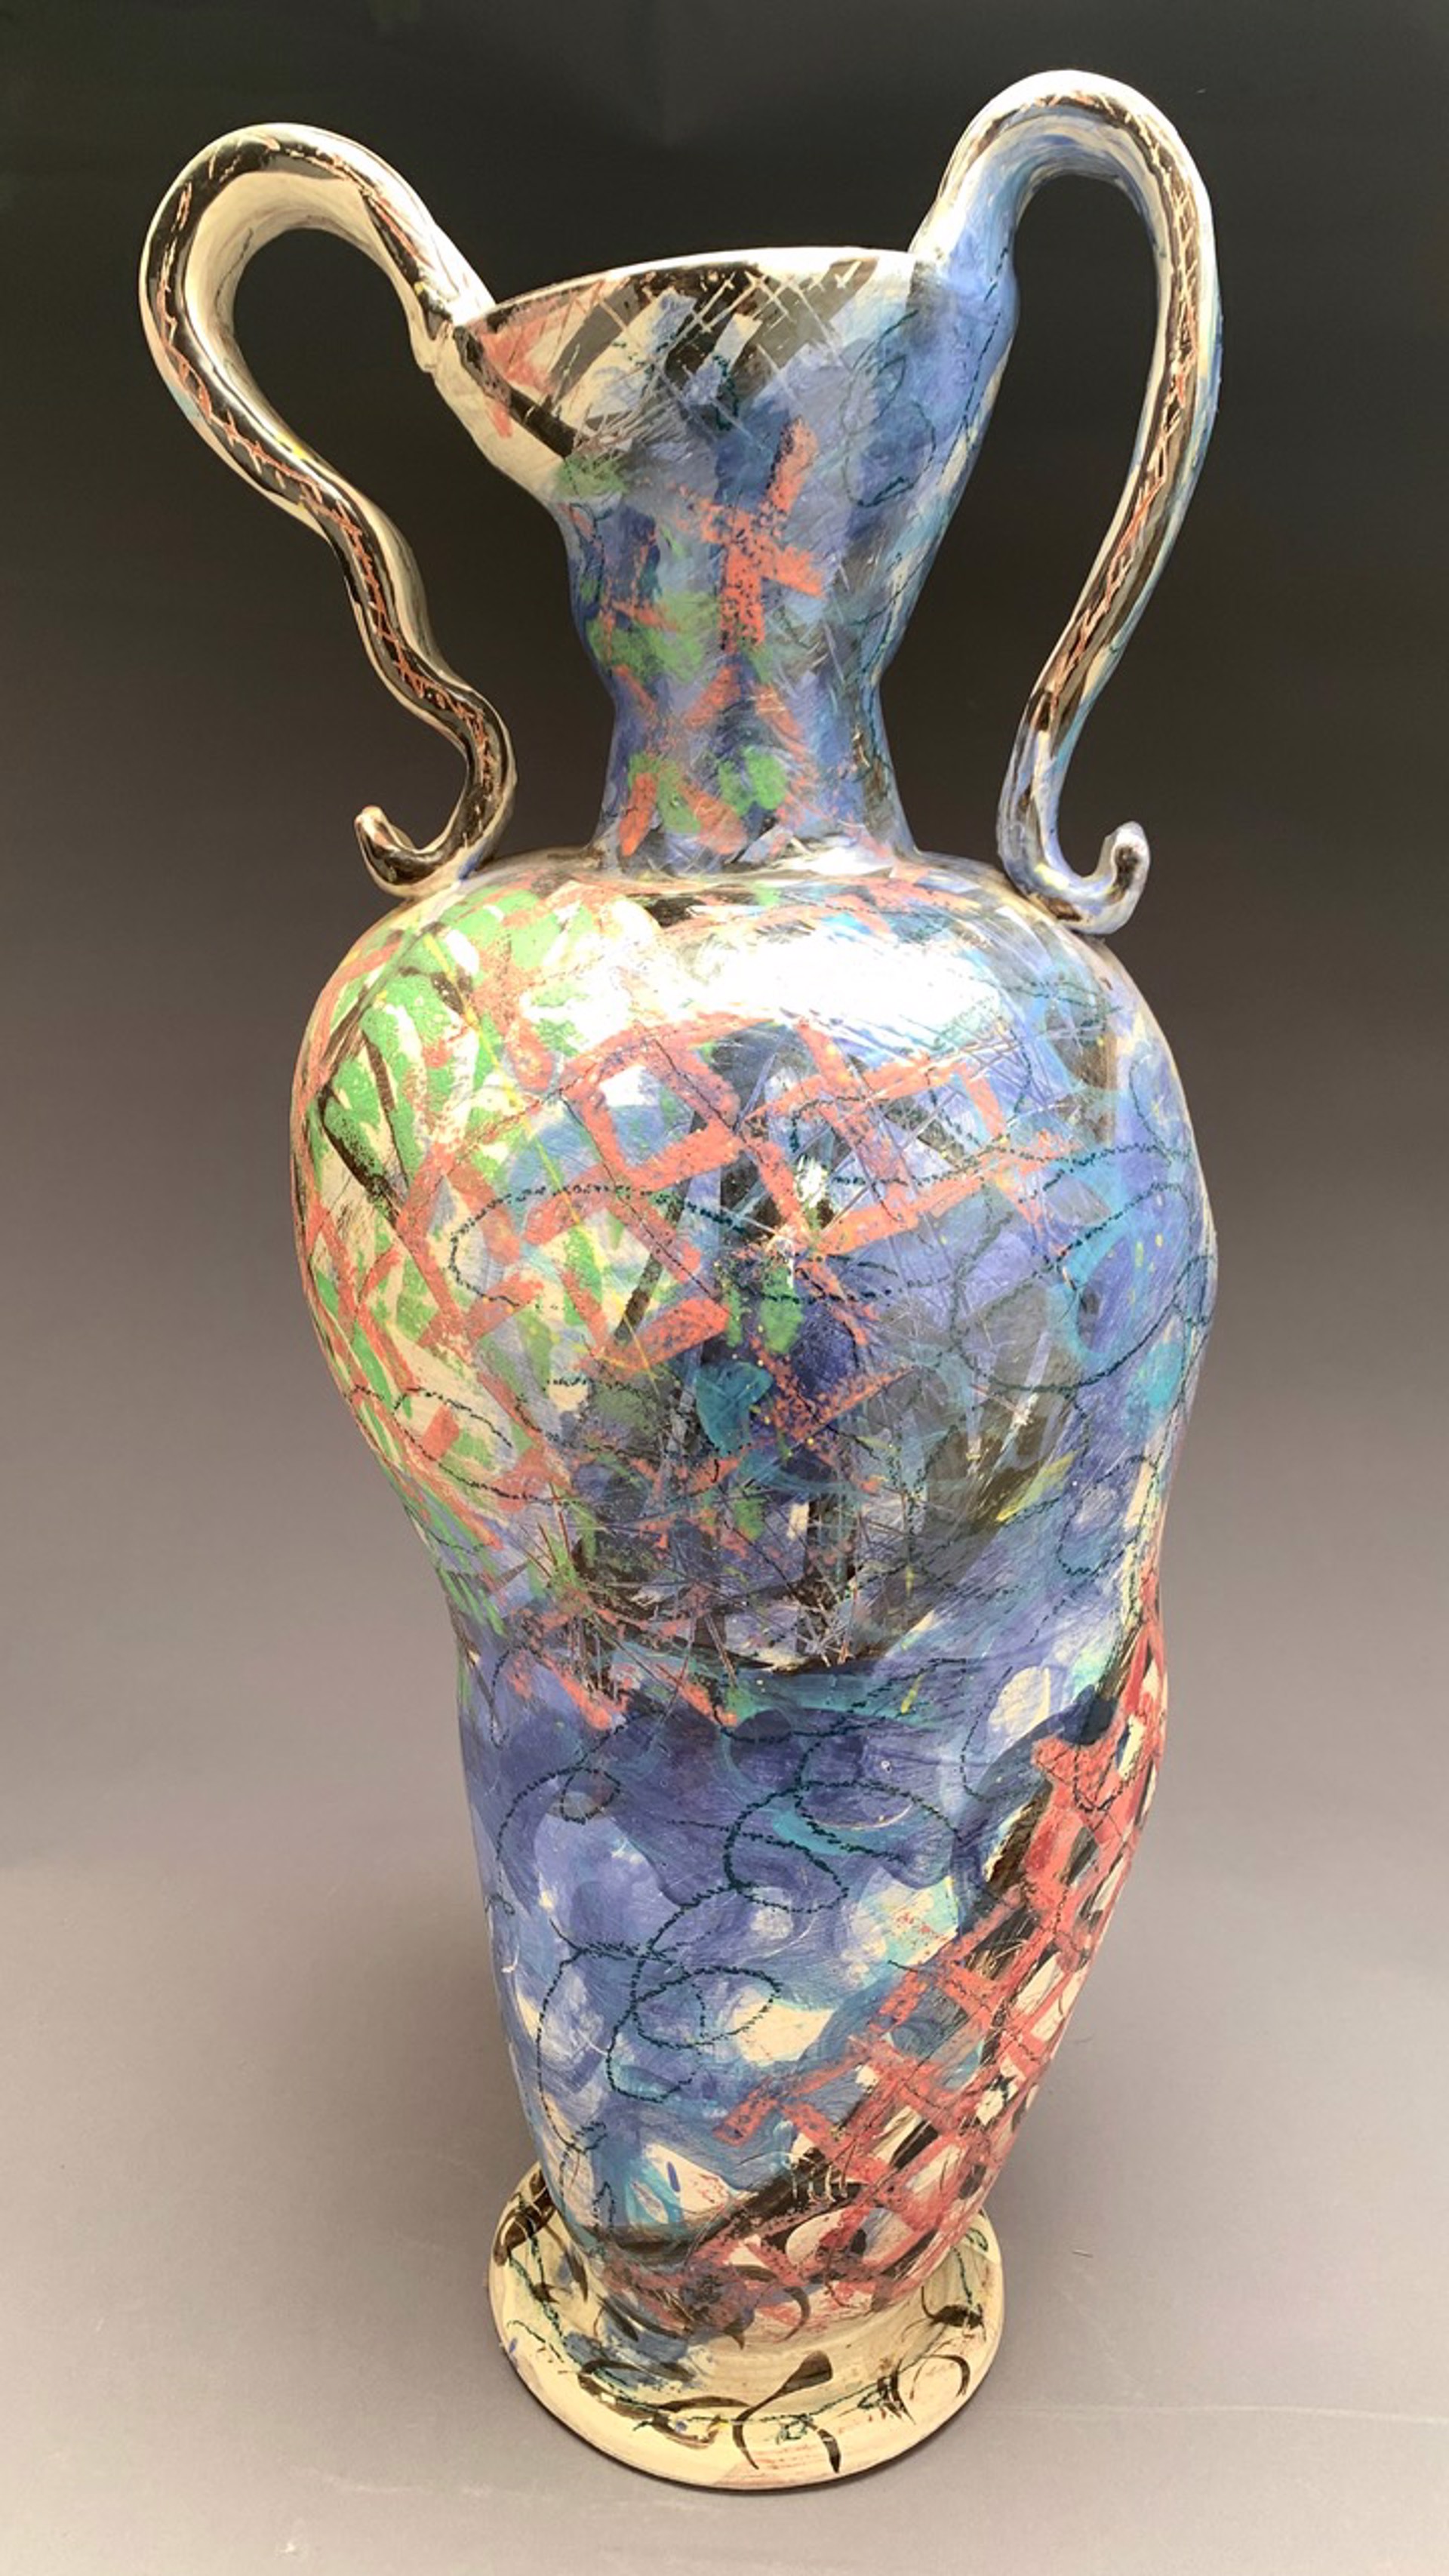 Amphora Working on Many Levels by Susan McGilvrey